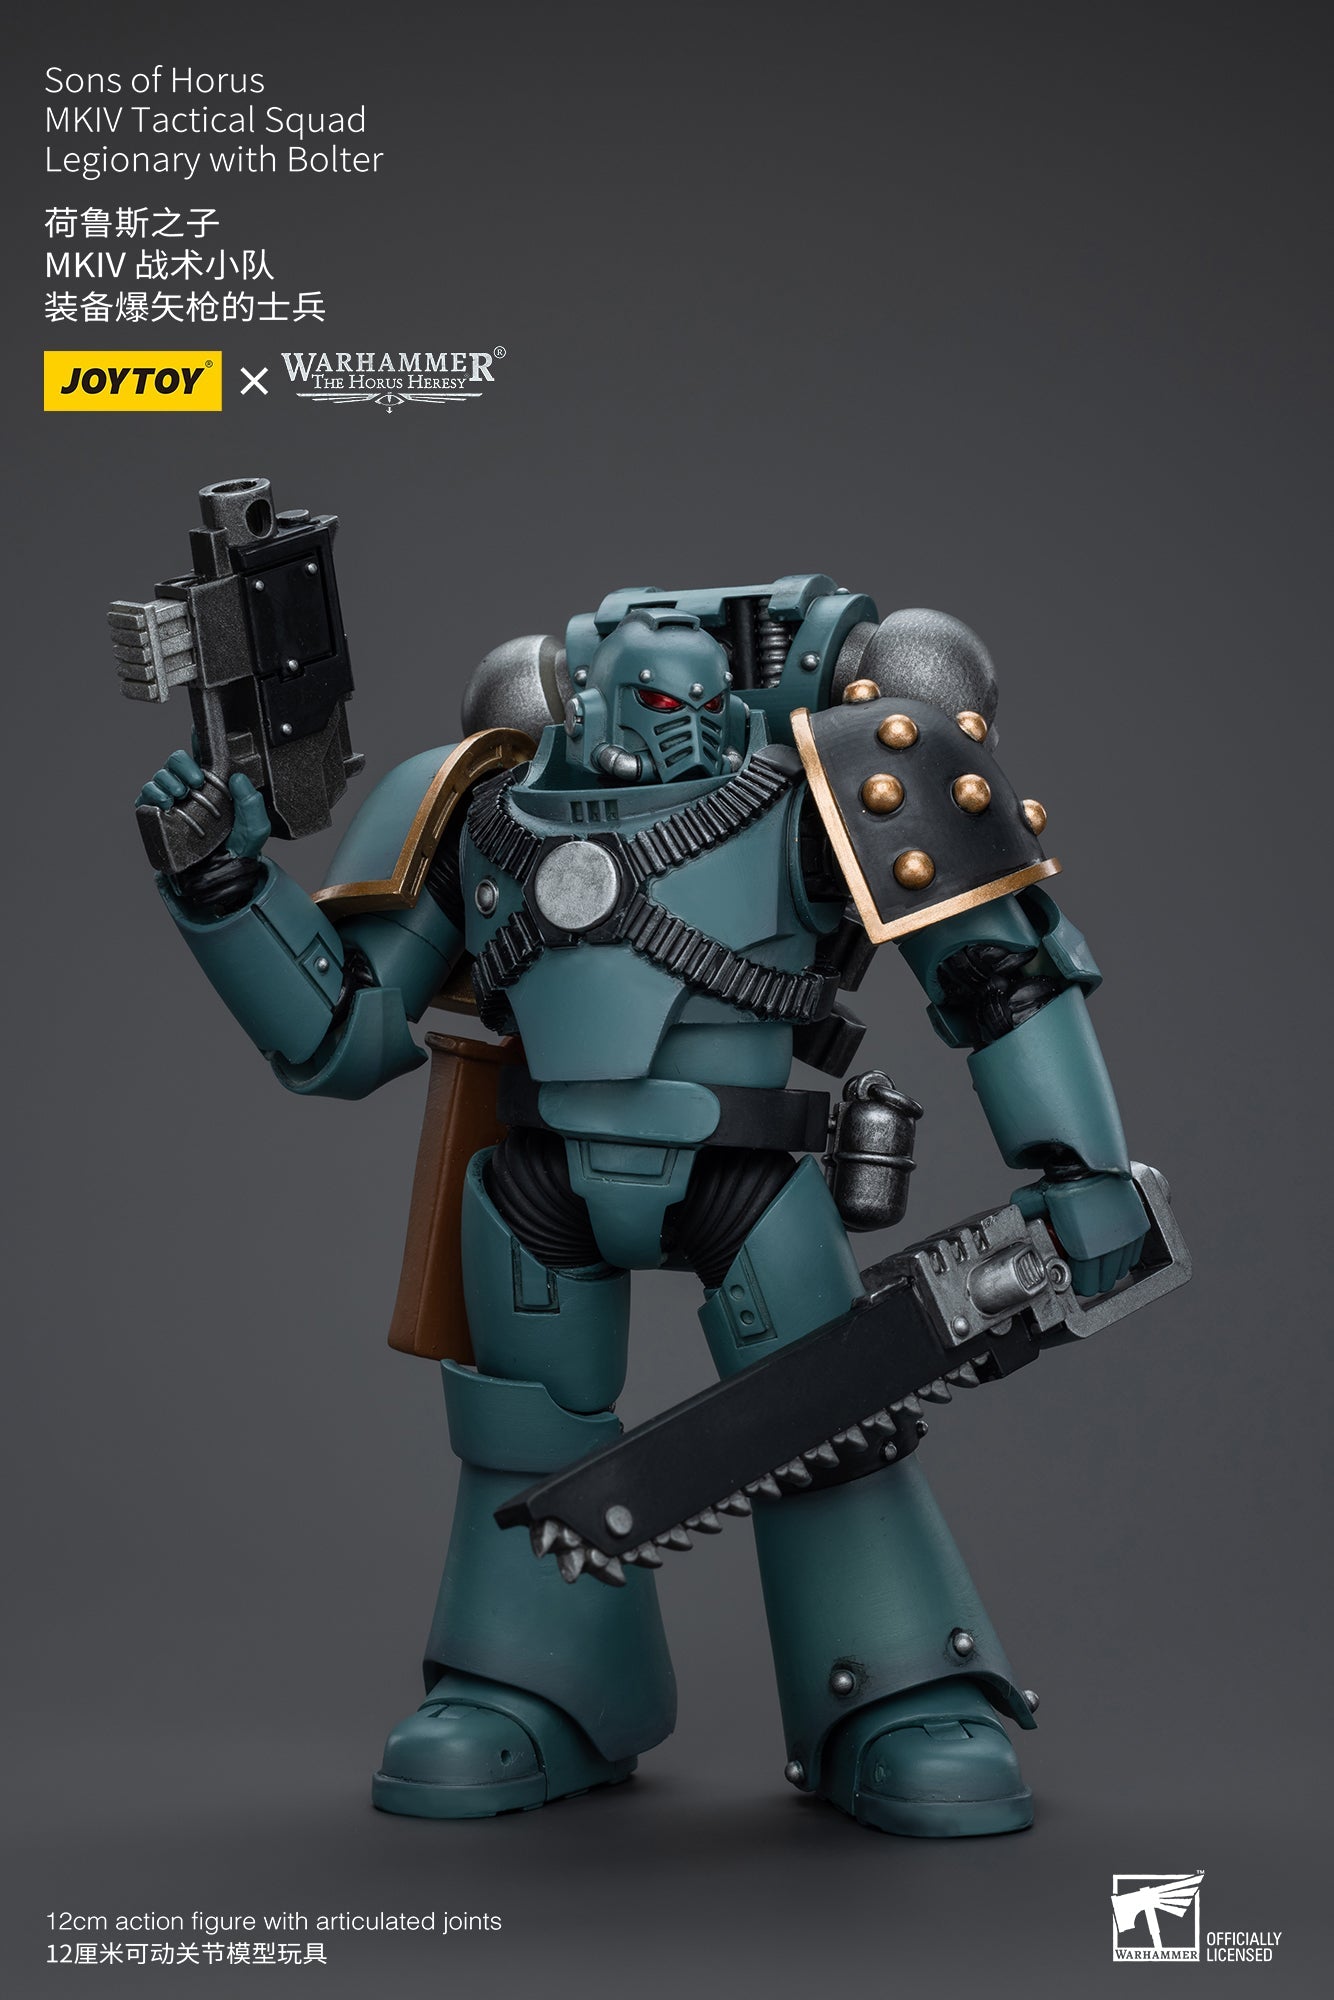 Sons of Horus MKIV Tactical Squad Legionary with Bolter - Warhammer "The Horus Heresy"Action Figure By JOYTOY